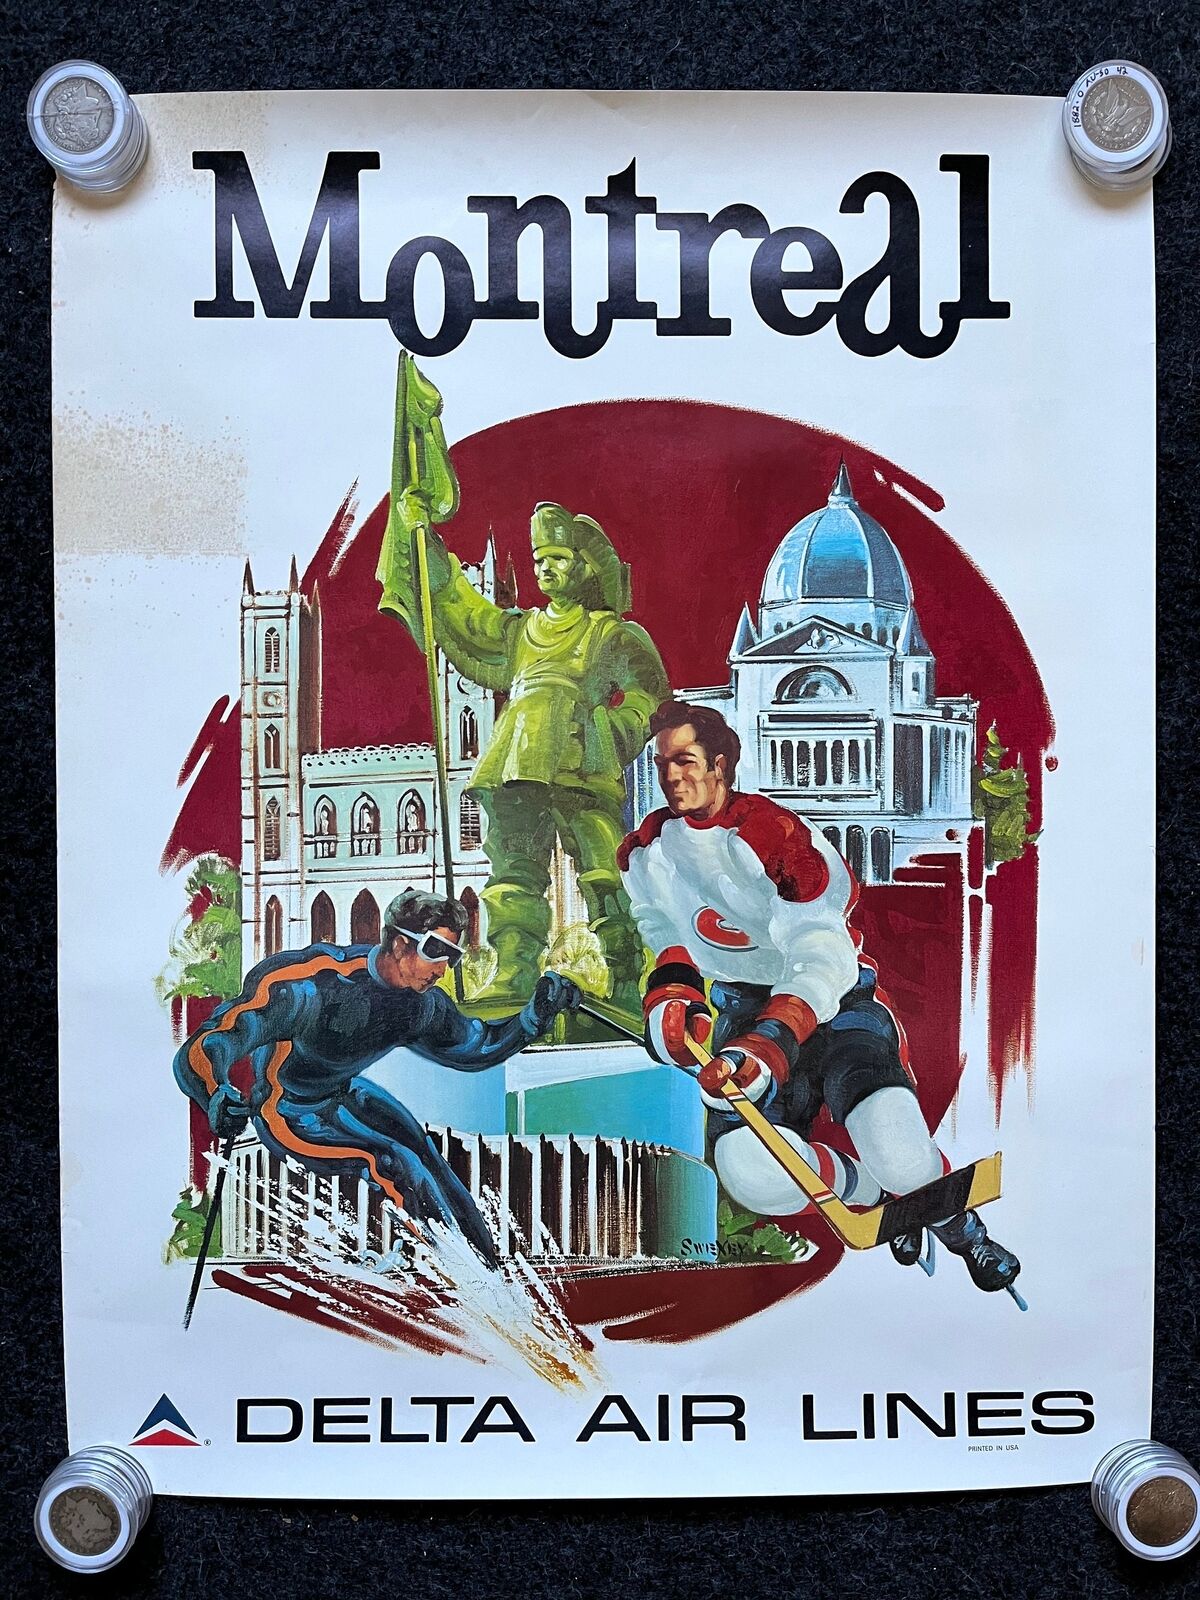 Original Montreal Canadian Travel Poster, Hockey Skiing Gifts, Vintage Aviation